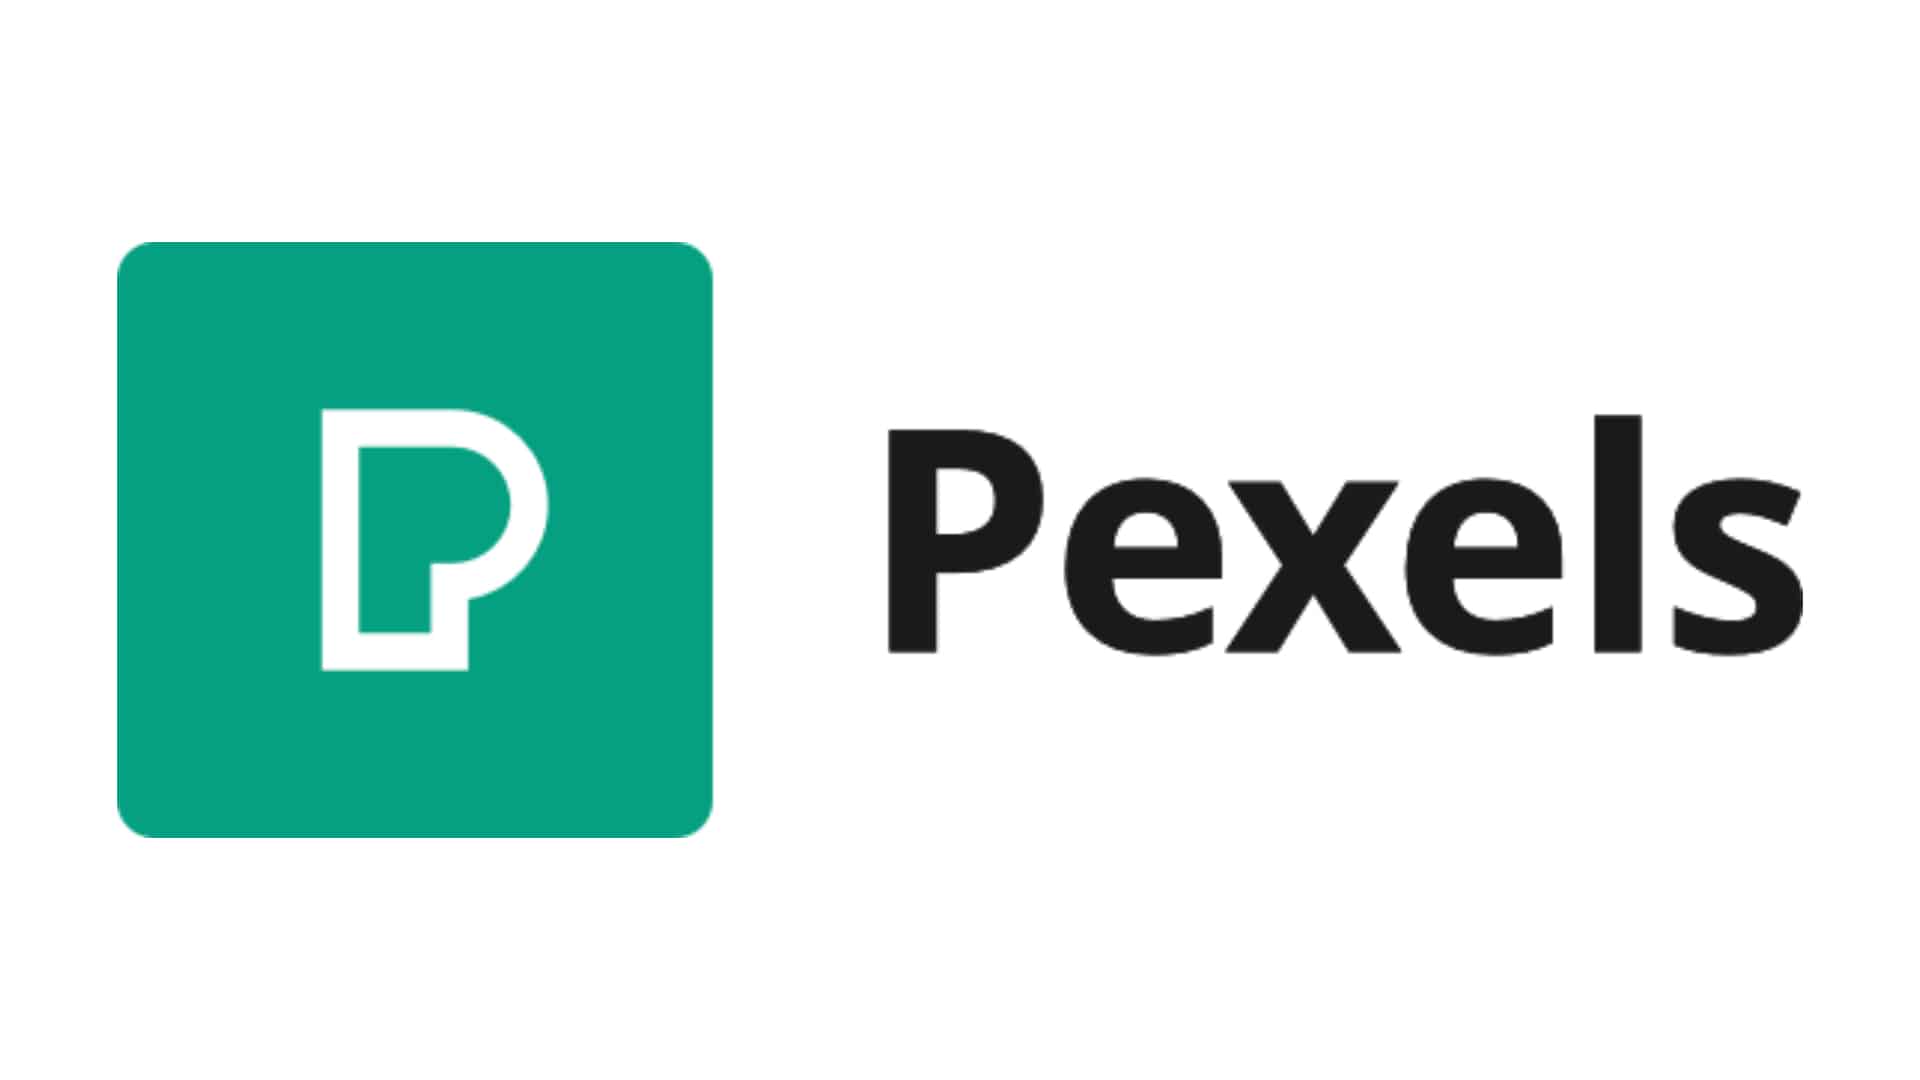 Pictory in partnership with Pexels